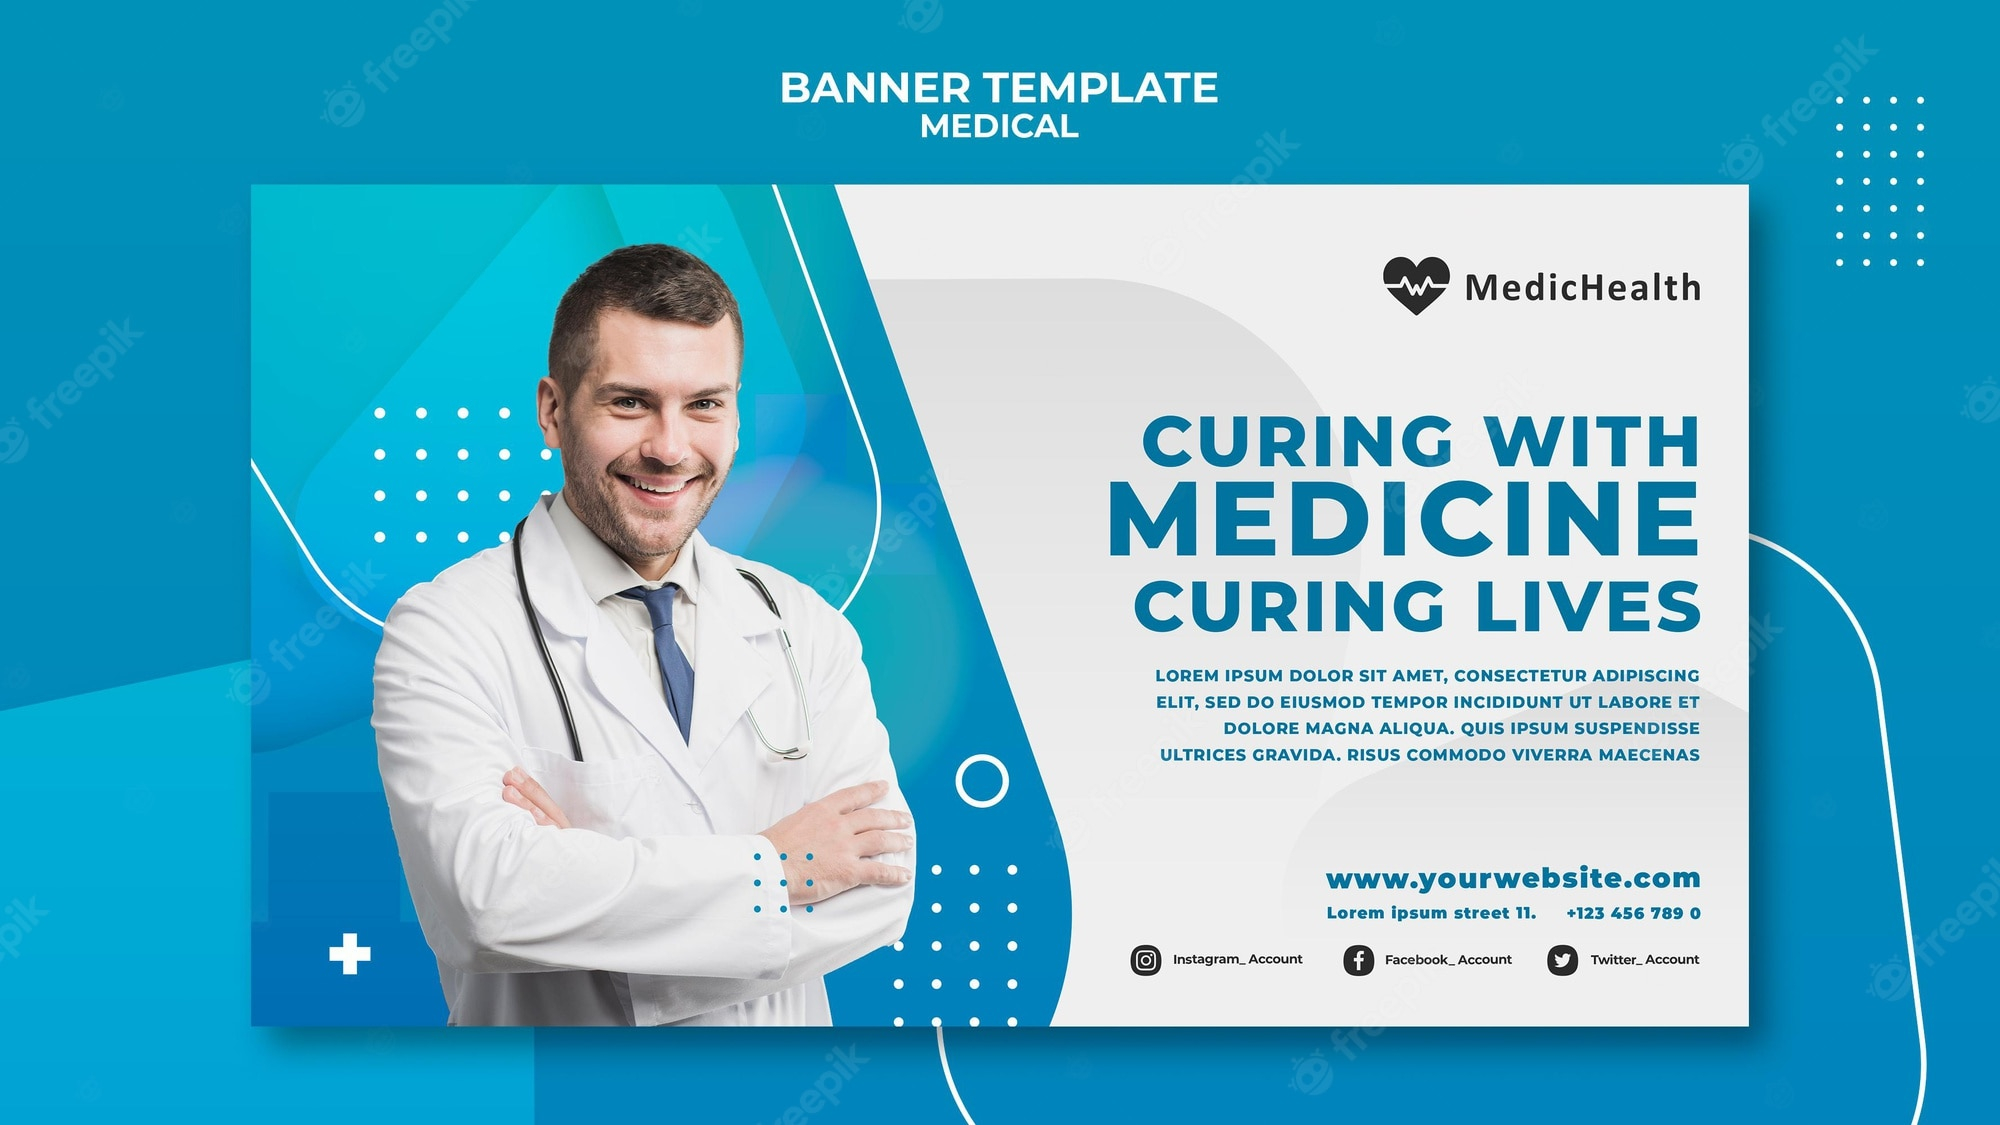 Medical Template Images  Free Vectors, Stock Photos & PSD In Medical Banner Template